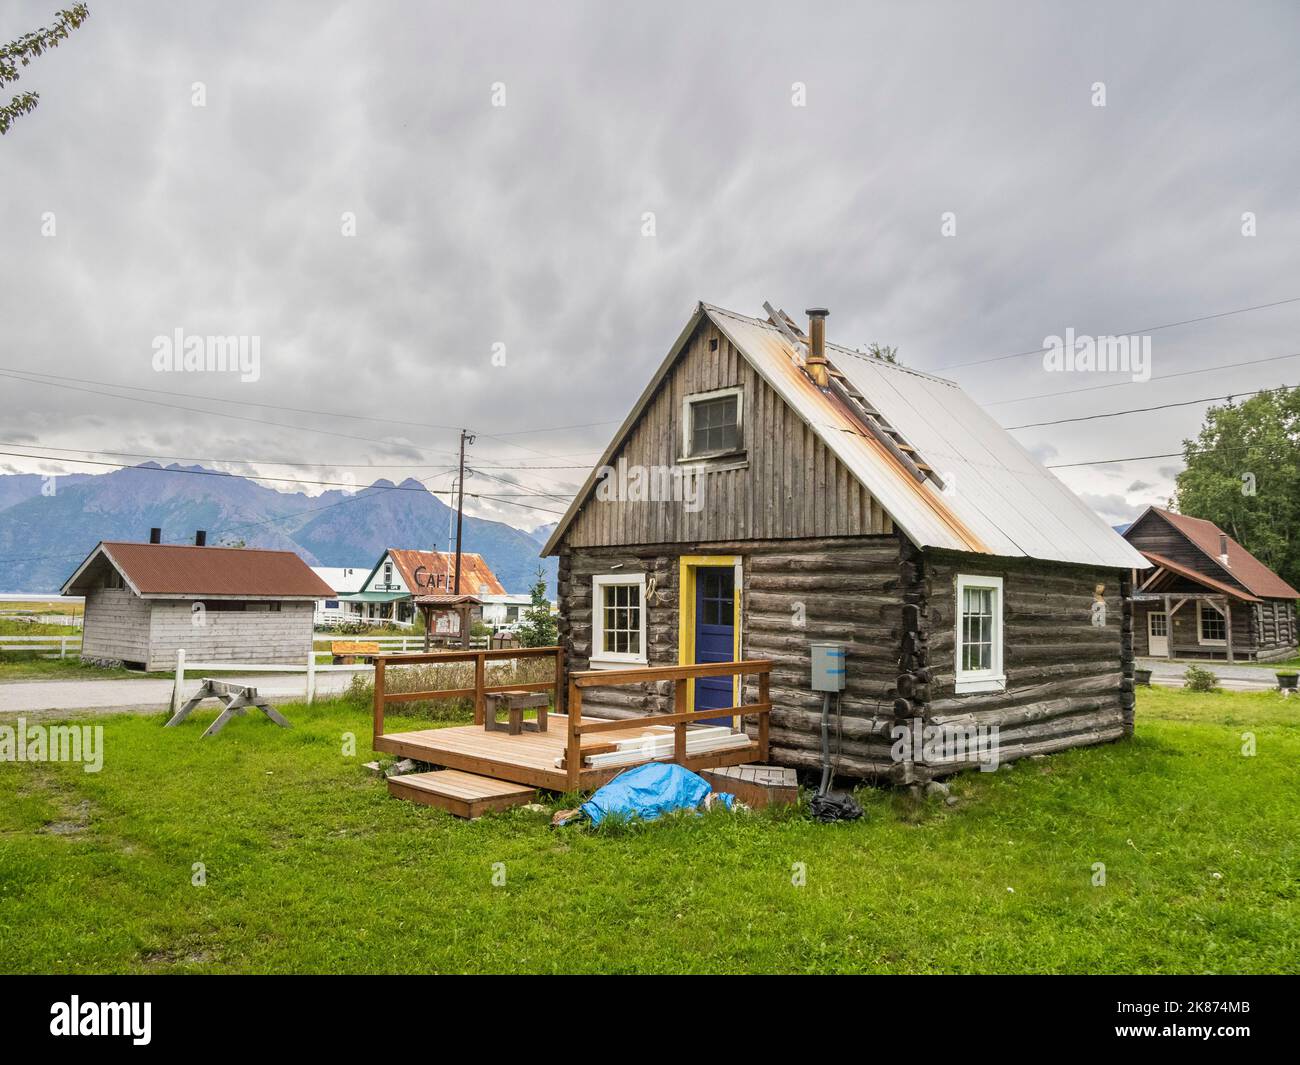 View of the town of Hope, on the south shore of the Turnagain Arm of Cook Inlet, Kenai Peninsula, Alaska, United States of America, North America Stock Photo